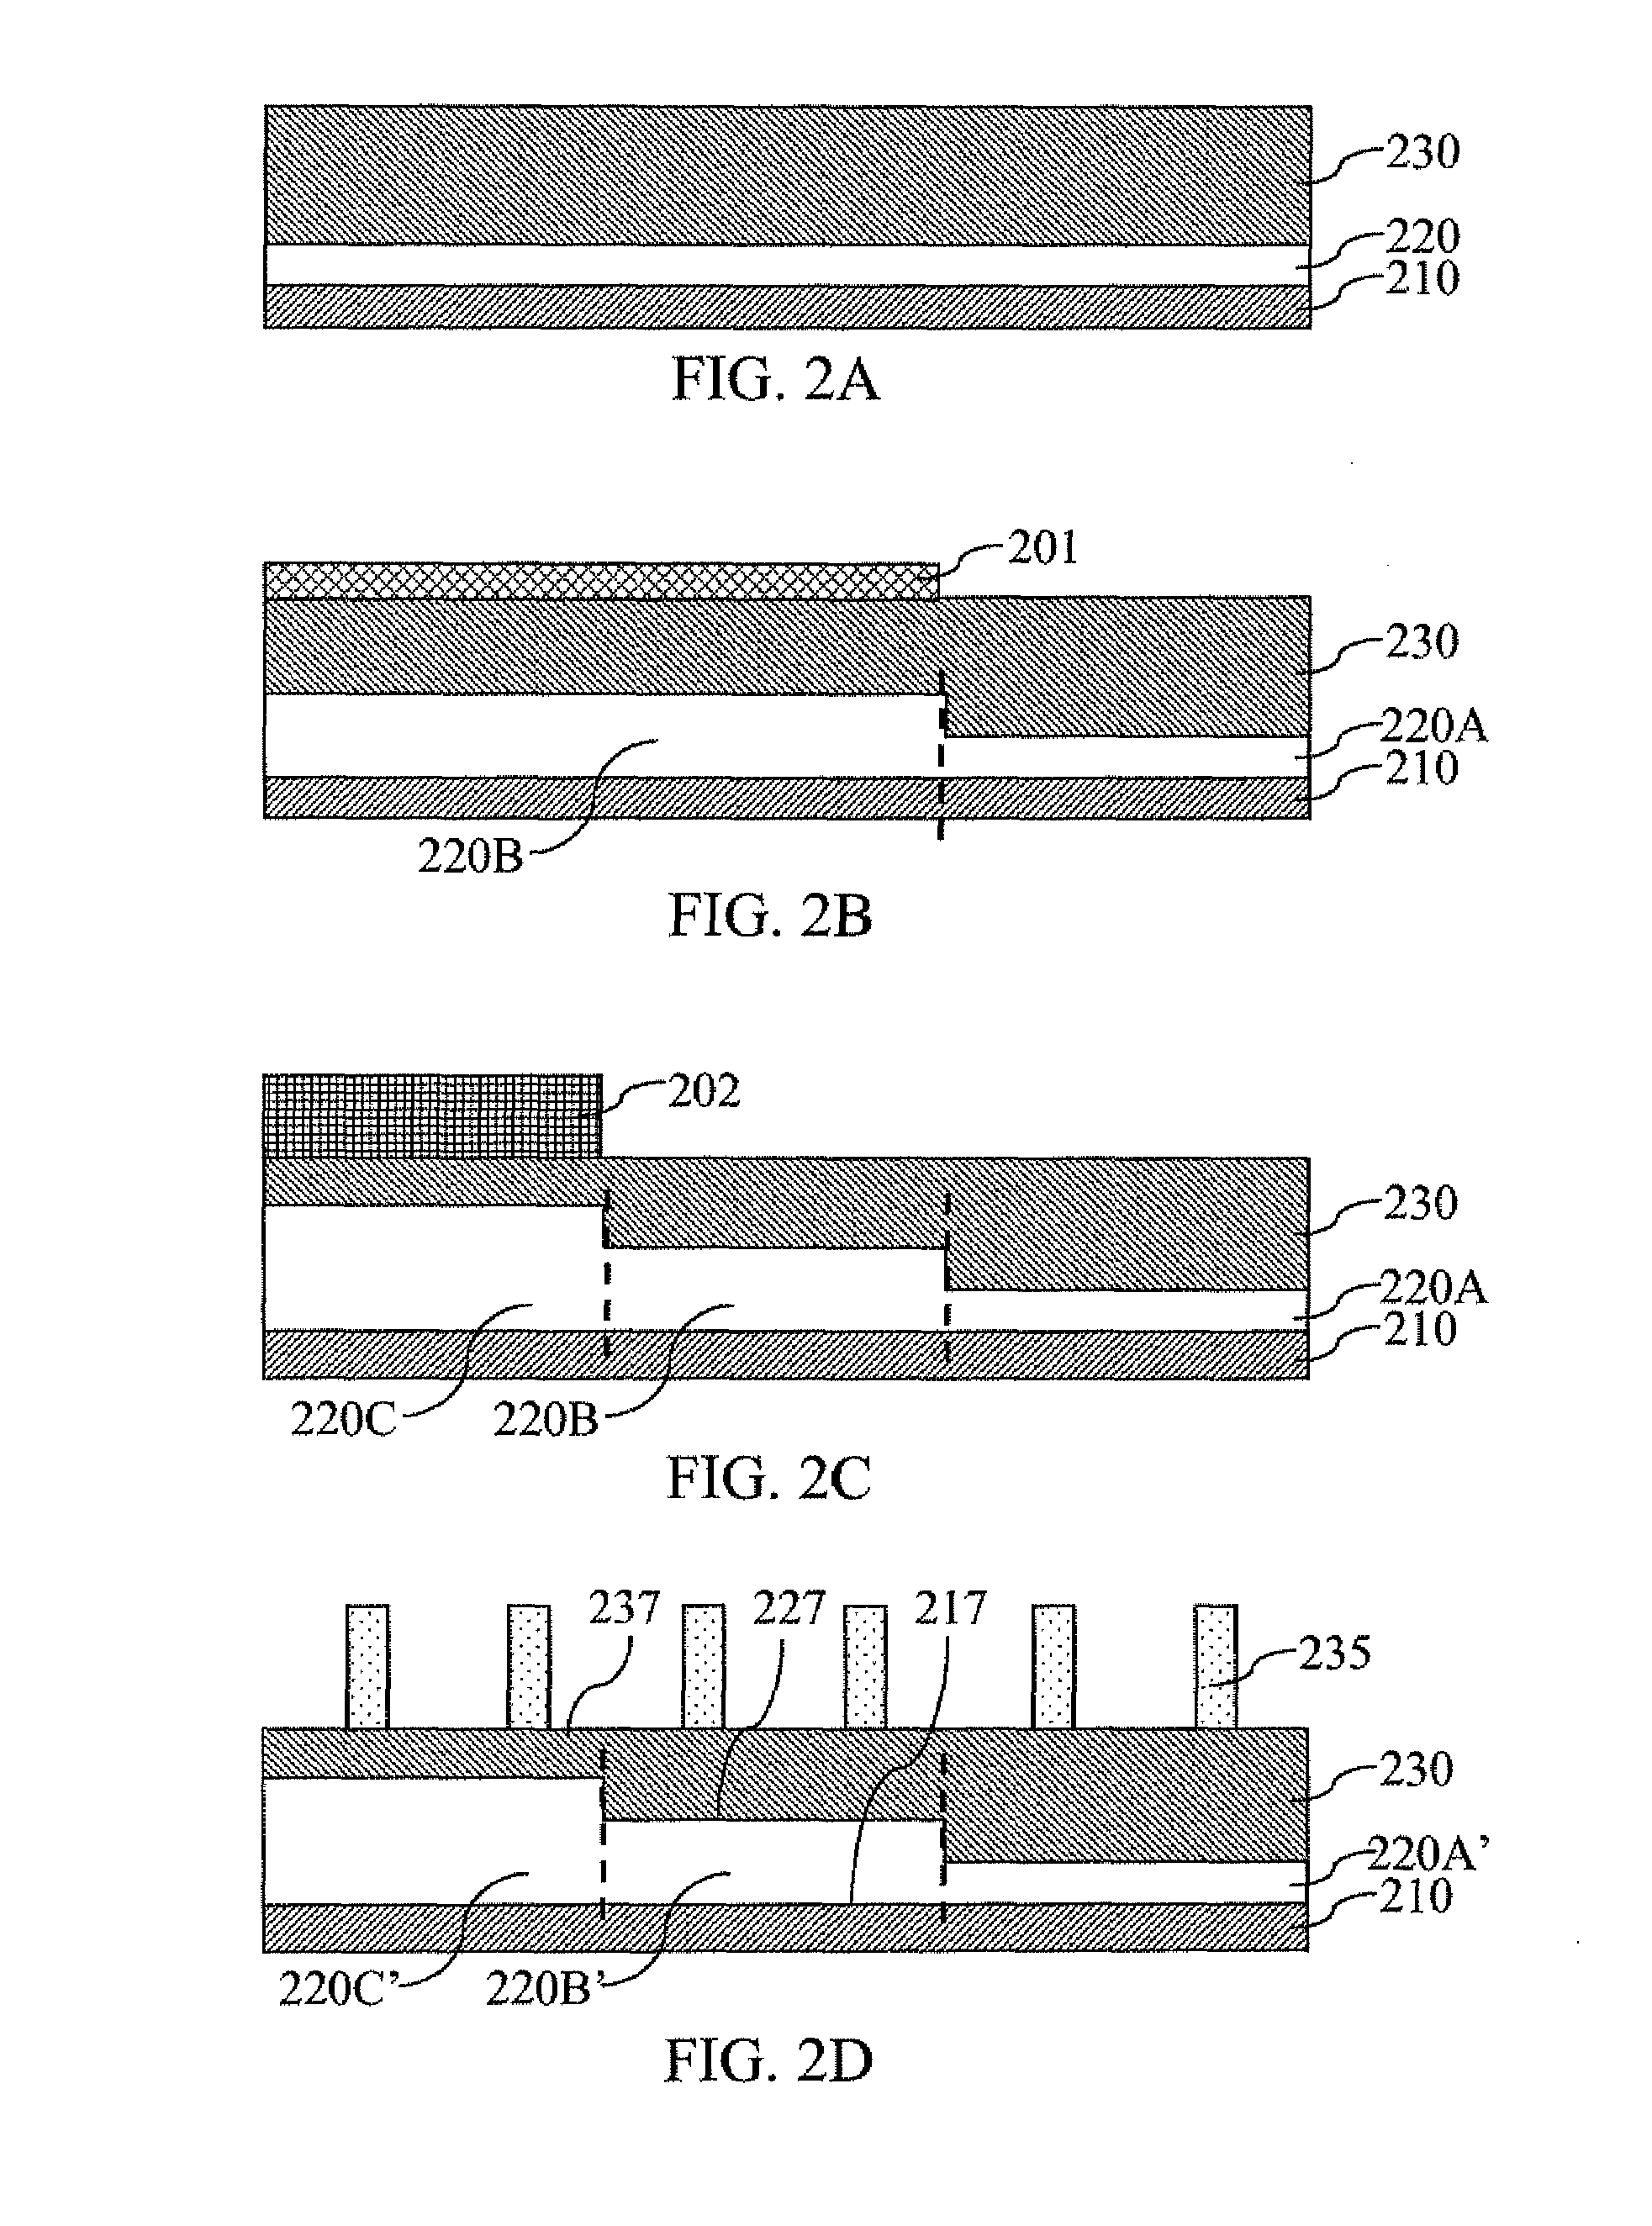 Structure and method for multiple height finfet devices